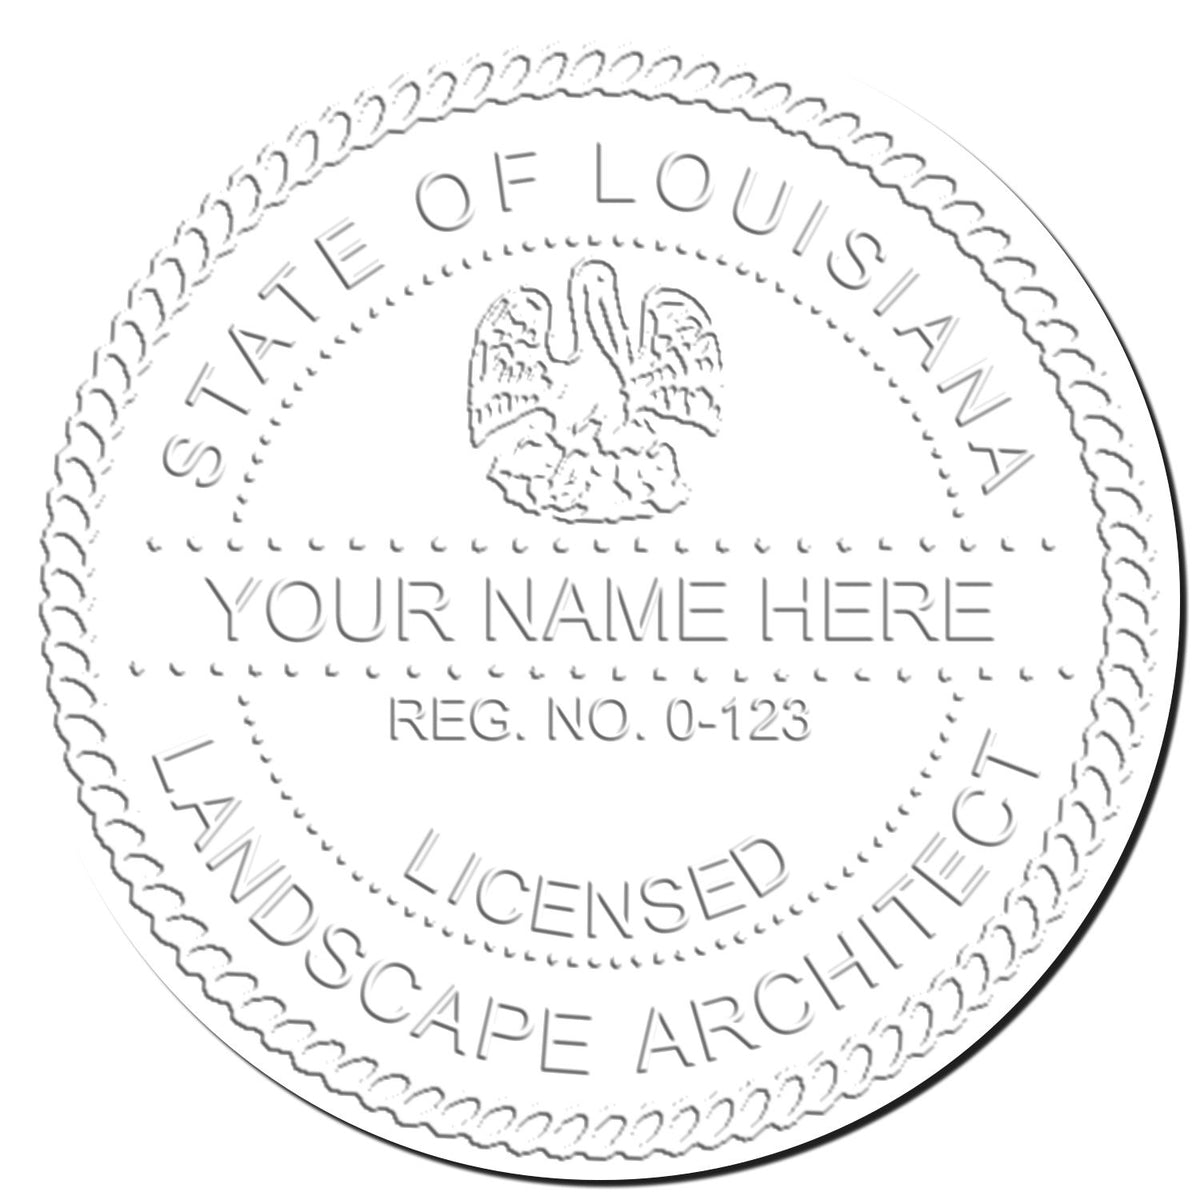 This paper is stamped with a sample imprint of the Hybrid Louisiana Landscape Architect Seal, signifying its quality and reliability.